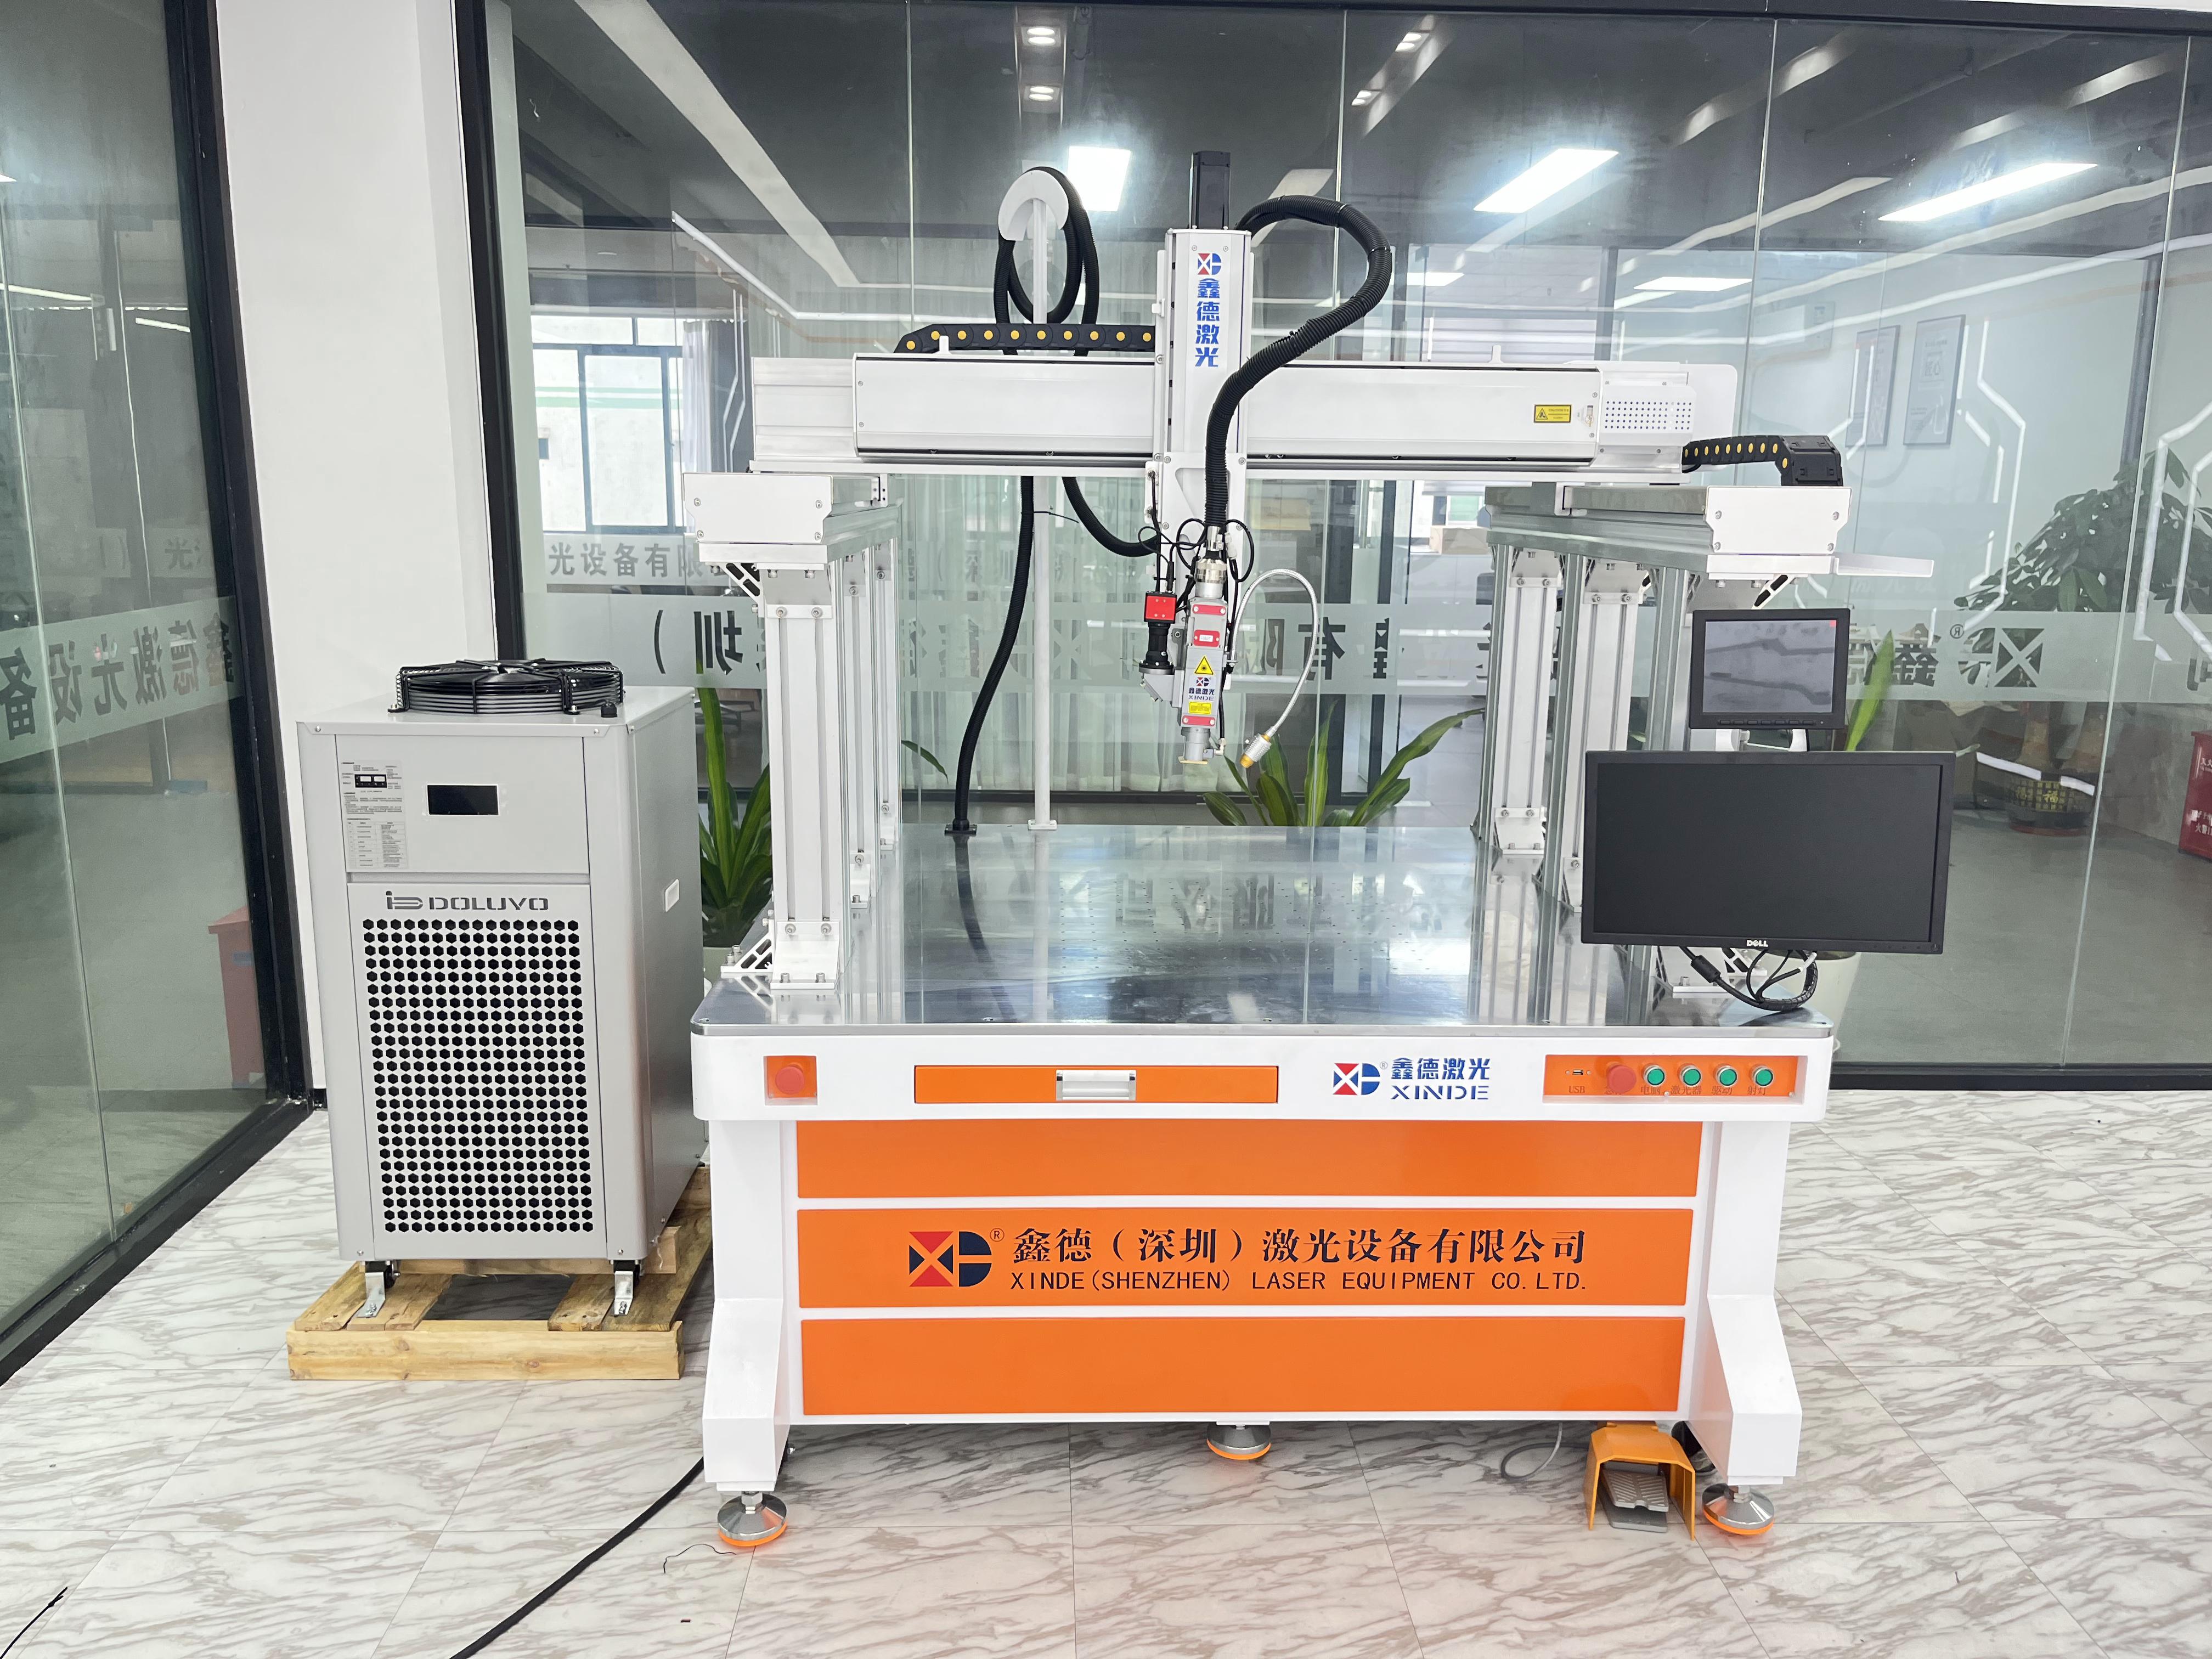 Why is automatic laser welding machine so popular